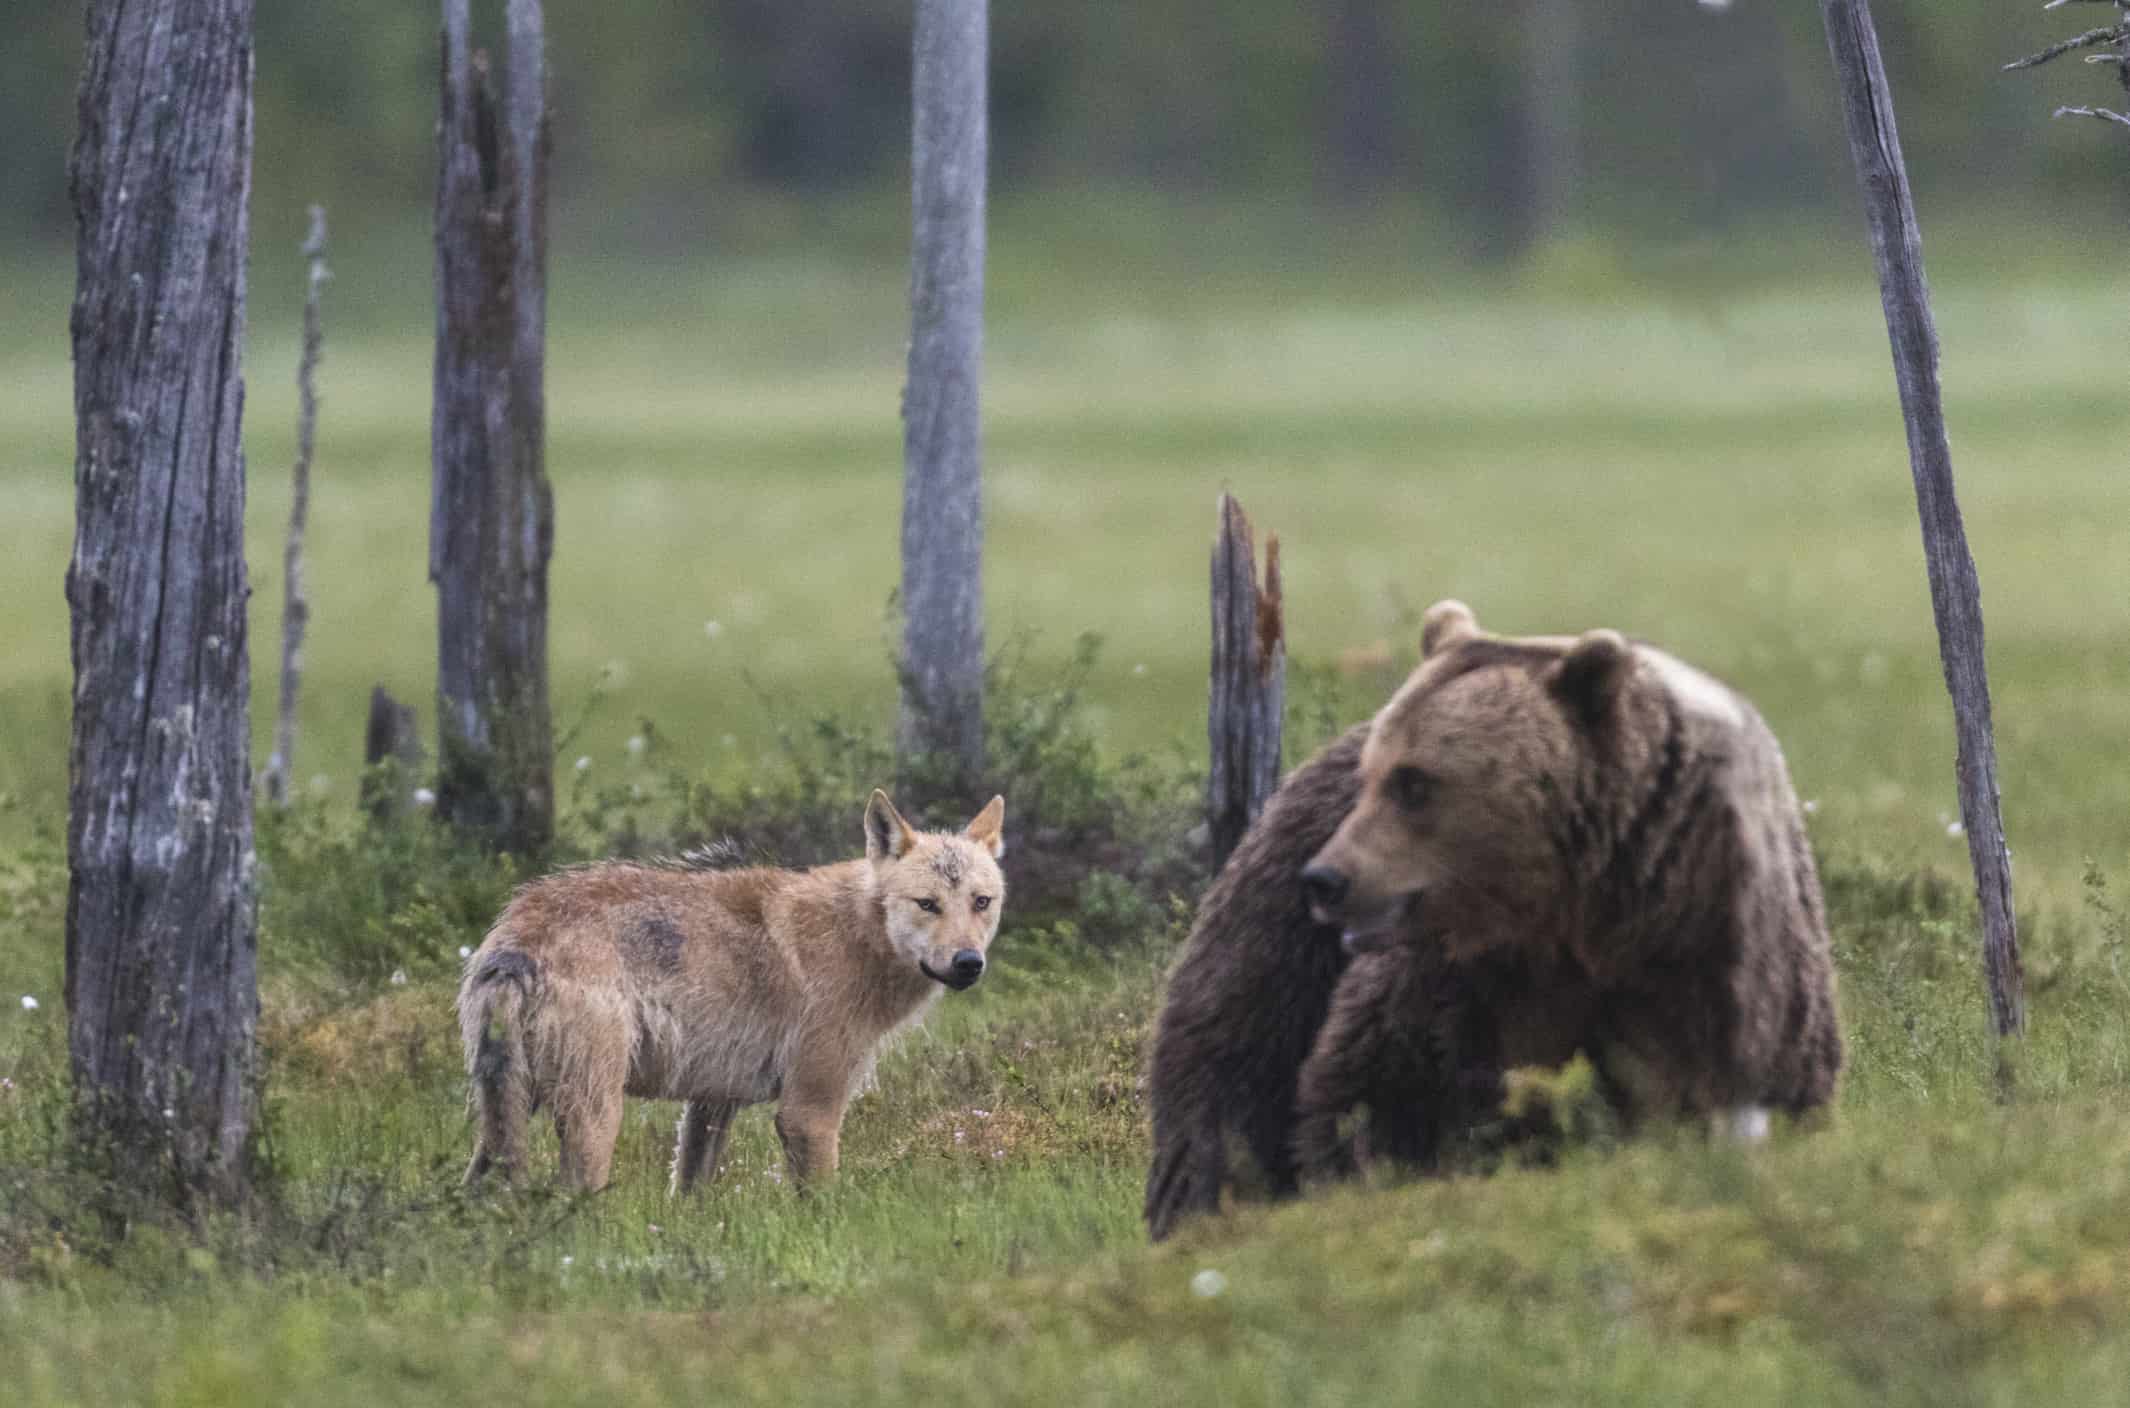 Camera Catches A Grizzly Bear And Wolf Team Up To Sneak Attack A Moose